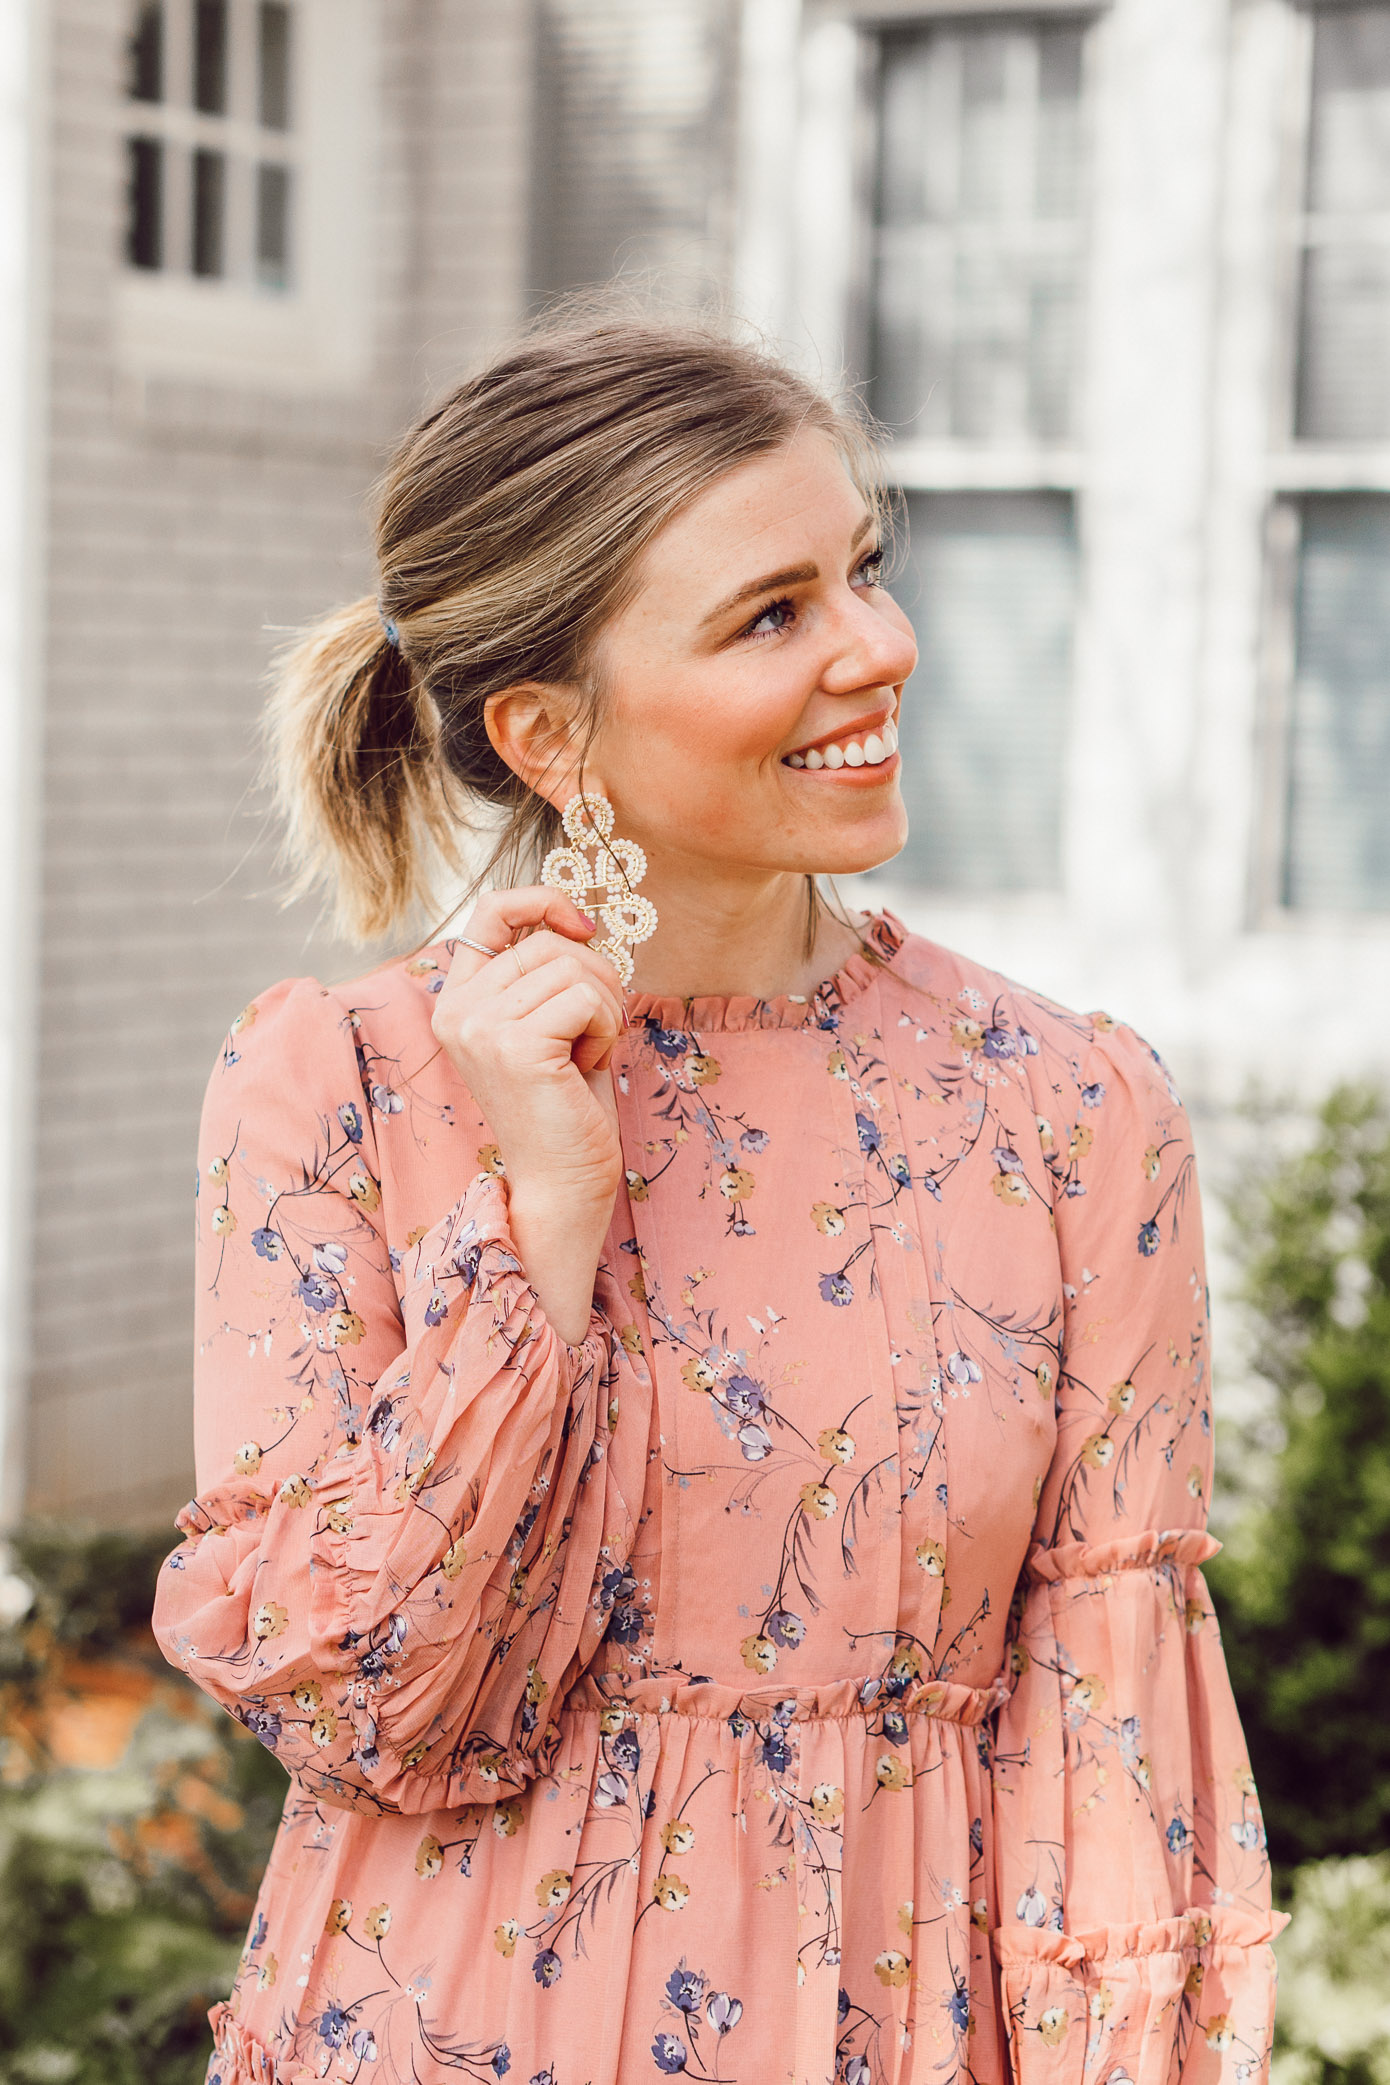 The prettiest white and gold statement earrings to wear this spring and summer + where to shop the seasons best statement earrings | Louella Reese